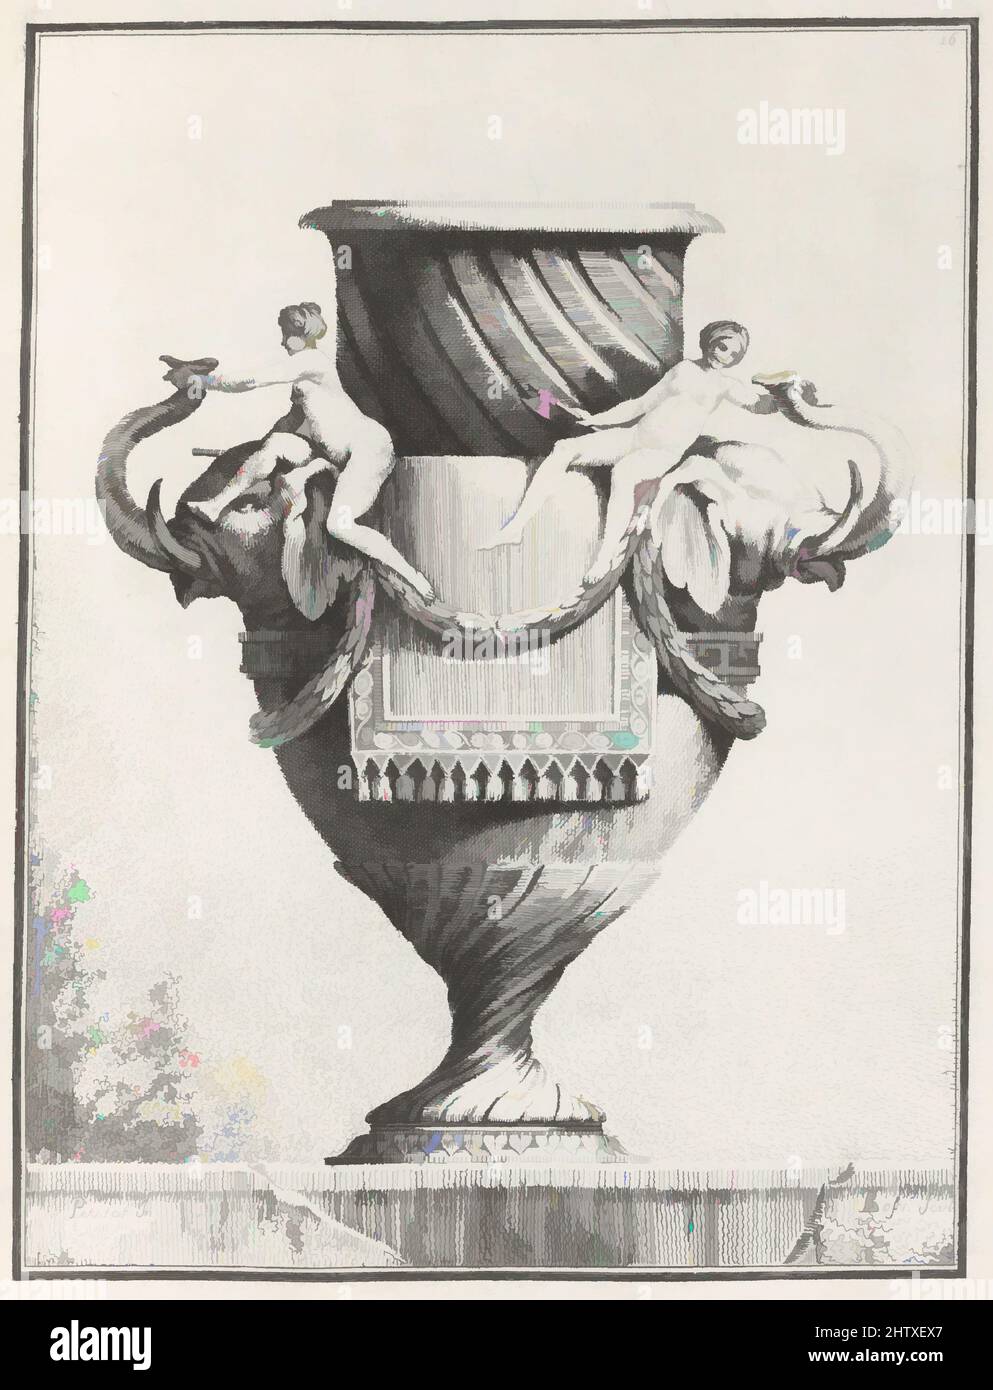 Art inspired by Suite de Vases, 1764, Etching, 12 7/8 x 9 1/8 x 11/16 in. (32.7 x 23.2 x 1.8 cm), Books, Ennemond Alexandre Petitot (French, Lyons 1727–1801 Parma, Classic works modernized by Artotop with a splash of modernity. Shapes, color and value, eye-catching visual impact on art. Emotions through freedom of artworks in a contemporary way. A timeless message pursuing a wildly creative new direction. Artists turning to the digital medium and creating the Artotop NFT Stock Photo